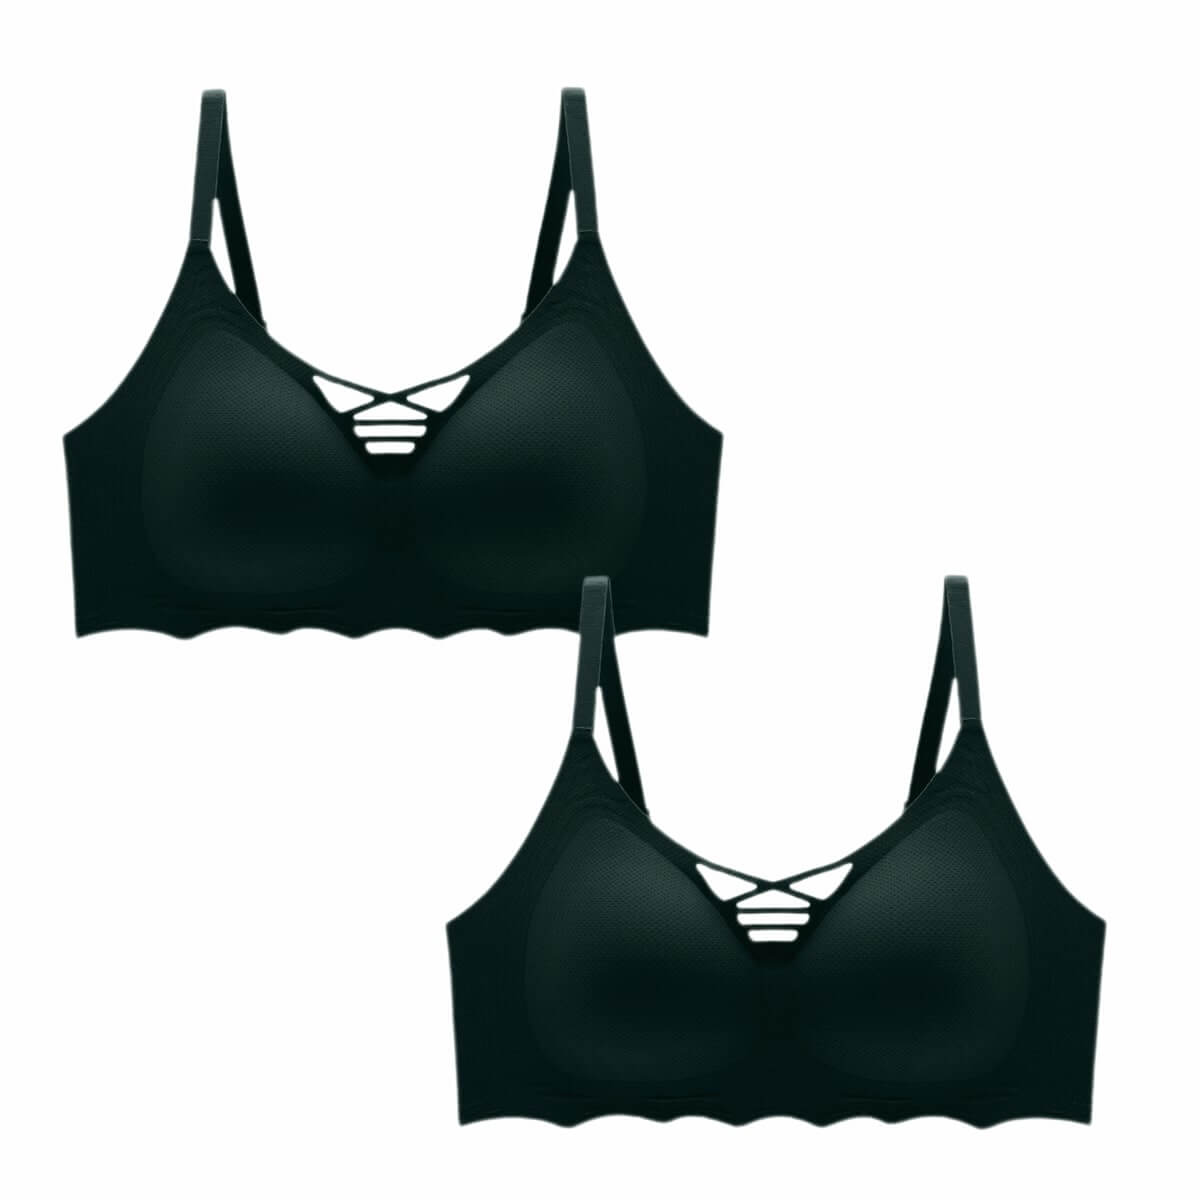  Strappy Sports Bra Sexy Bralettes For Women Push Up Bralette  Top Black Red XL 2 Pack